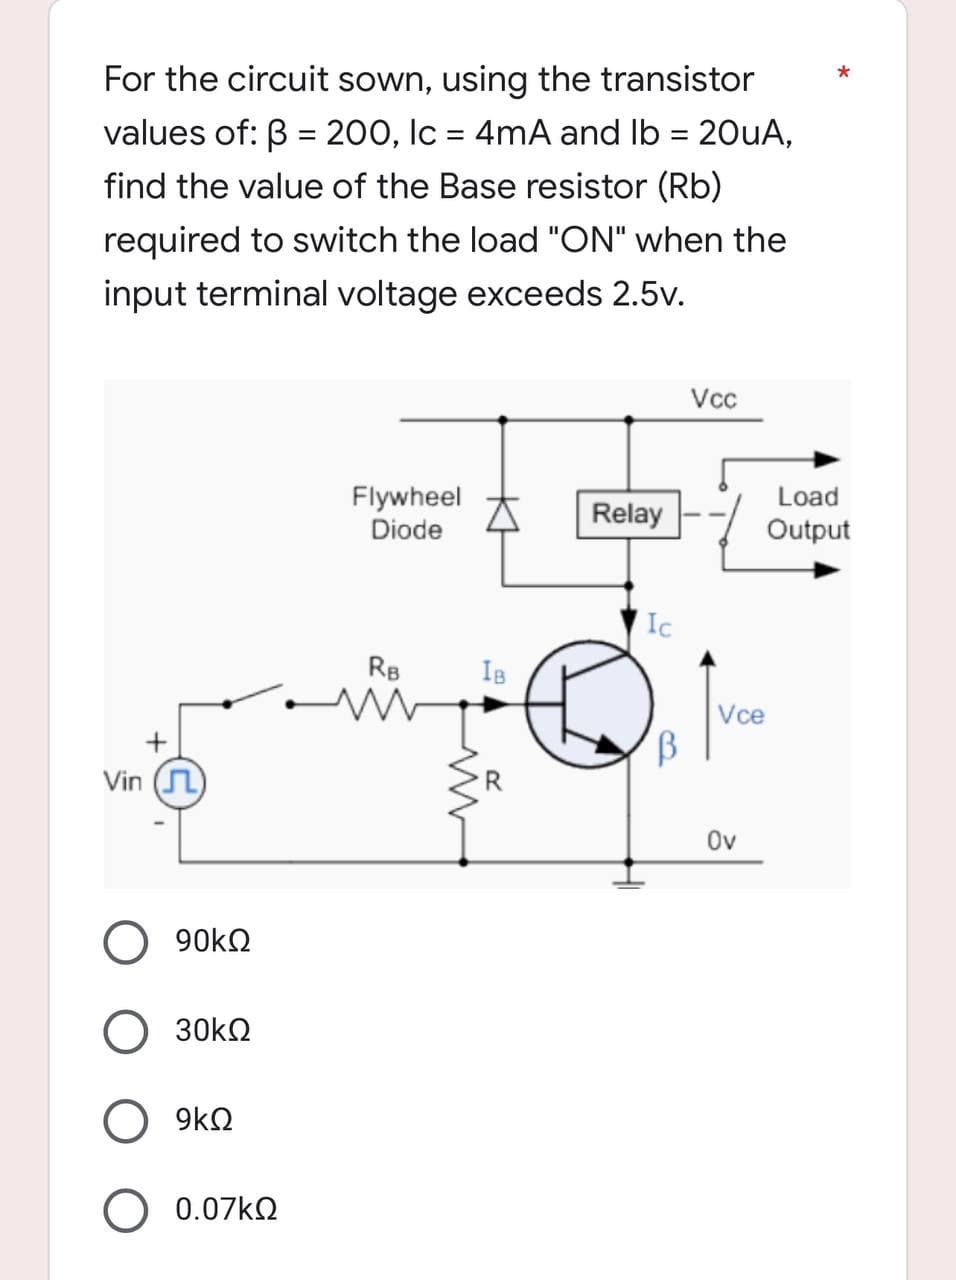 *
For the circuit sown, using the transistor
values of: B = 200, lc = 4mA and lb = 20uA,
find the value of the Base resistor (Rb)
required to switch the load "ON" when the
input terminal voltage exceeds 2.5v.
Vcc
Flywheel
Diode
Relay
RB
w
Vin ()
90kΩ
30ΚΩ
9kQ
0.07ΚΩ
IB
Ic
B
Vce
Ov
Load
Output